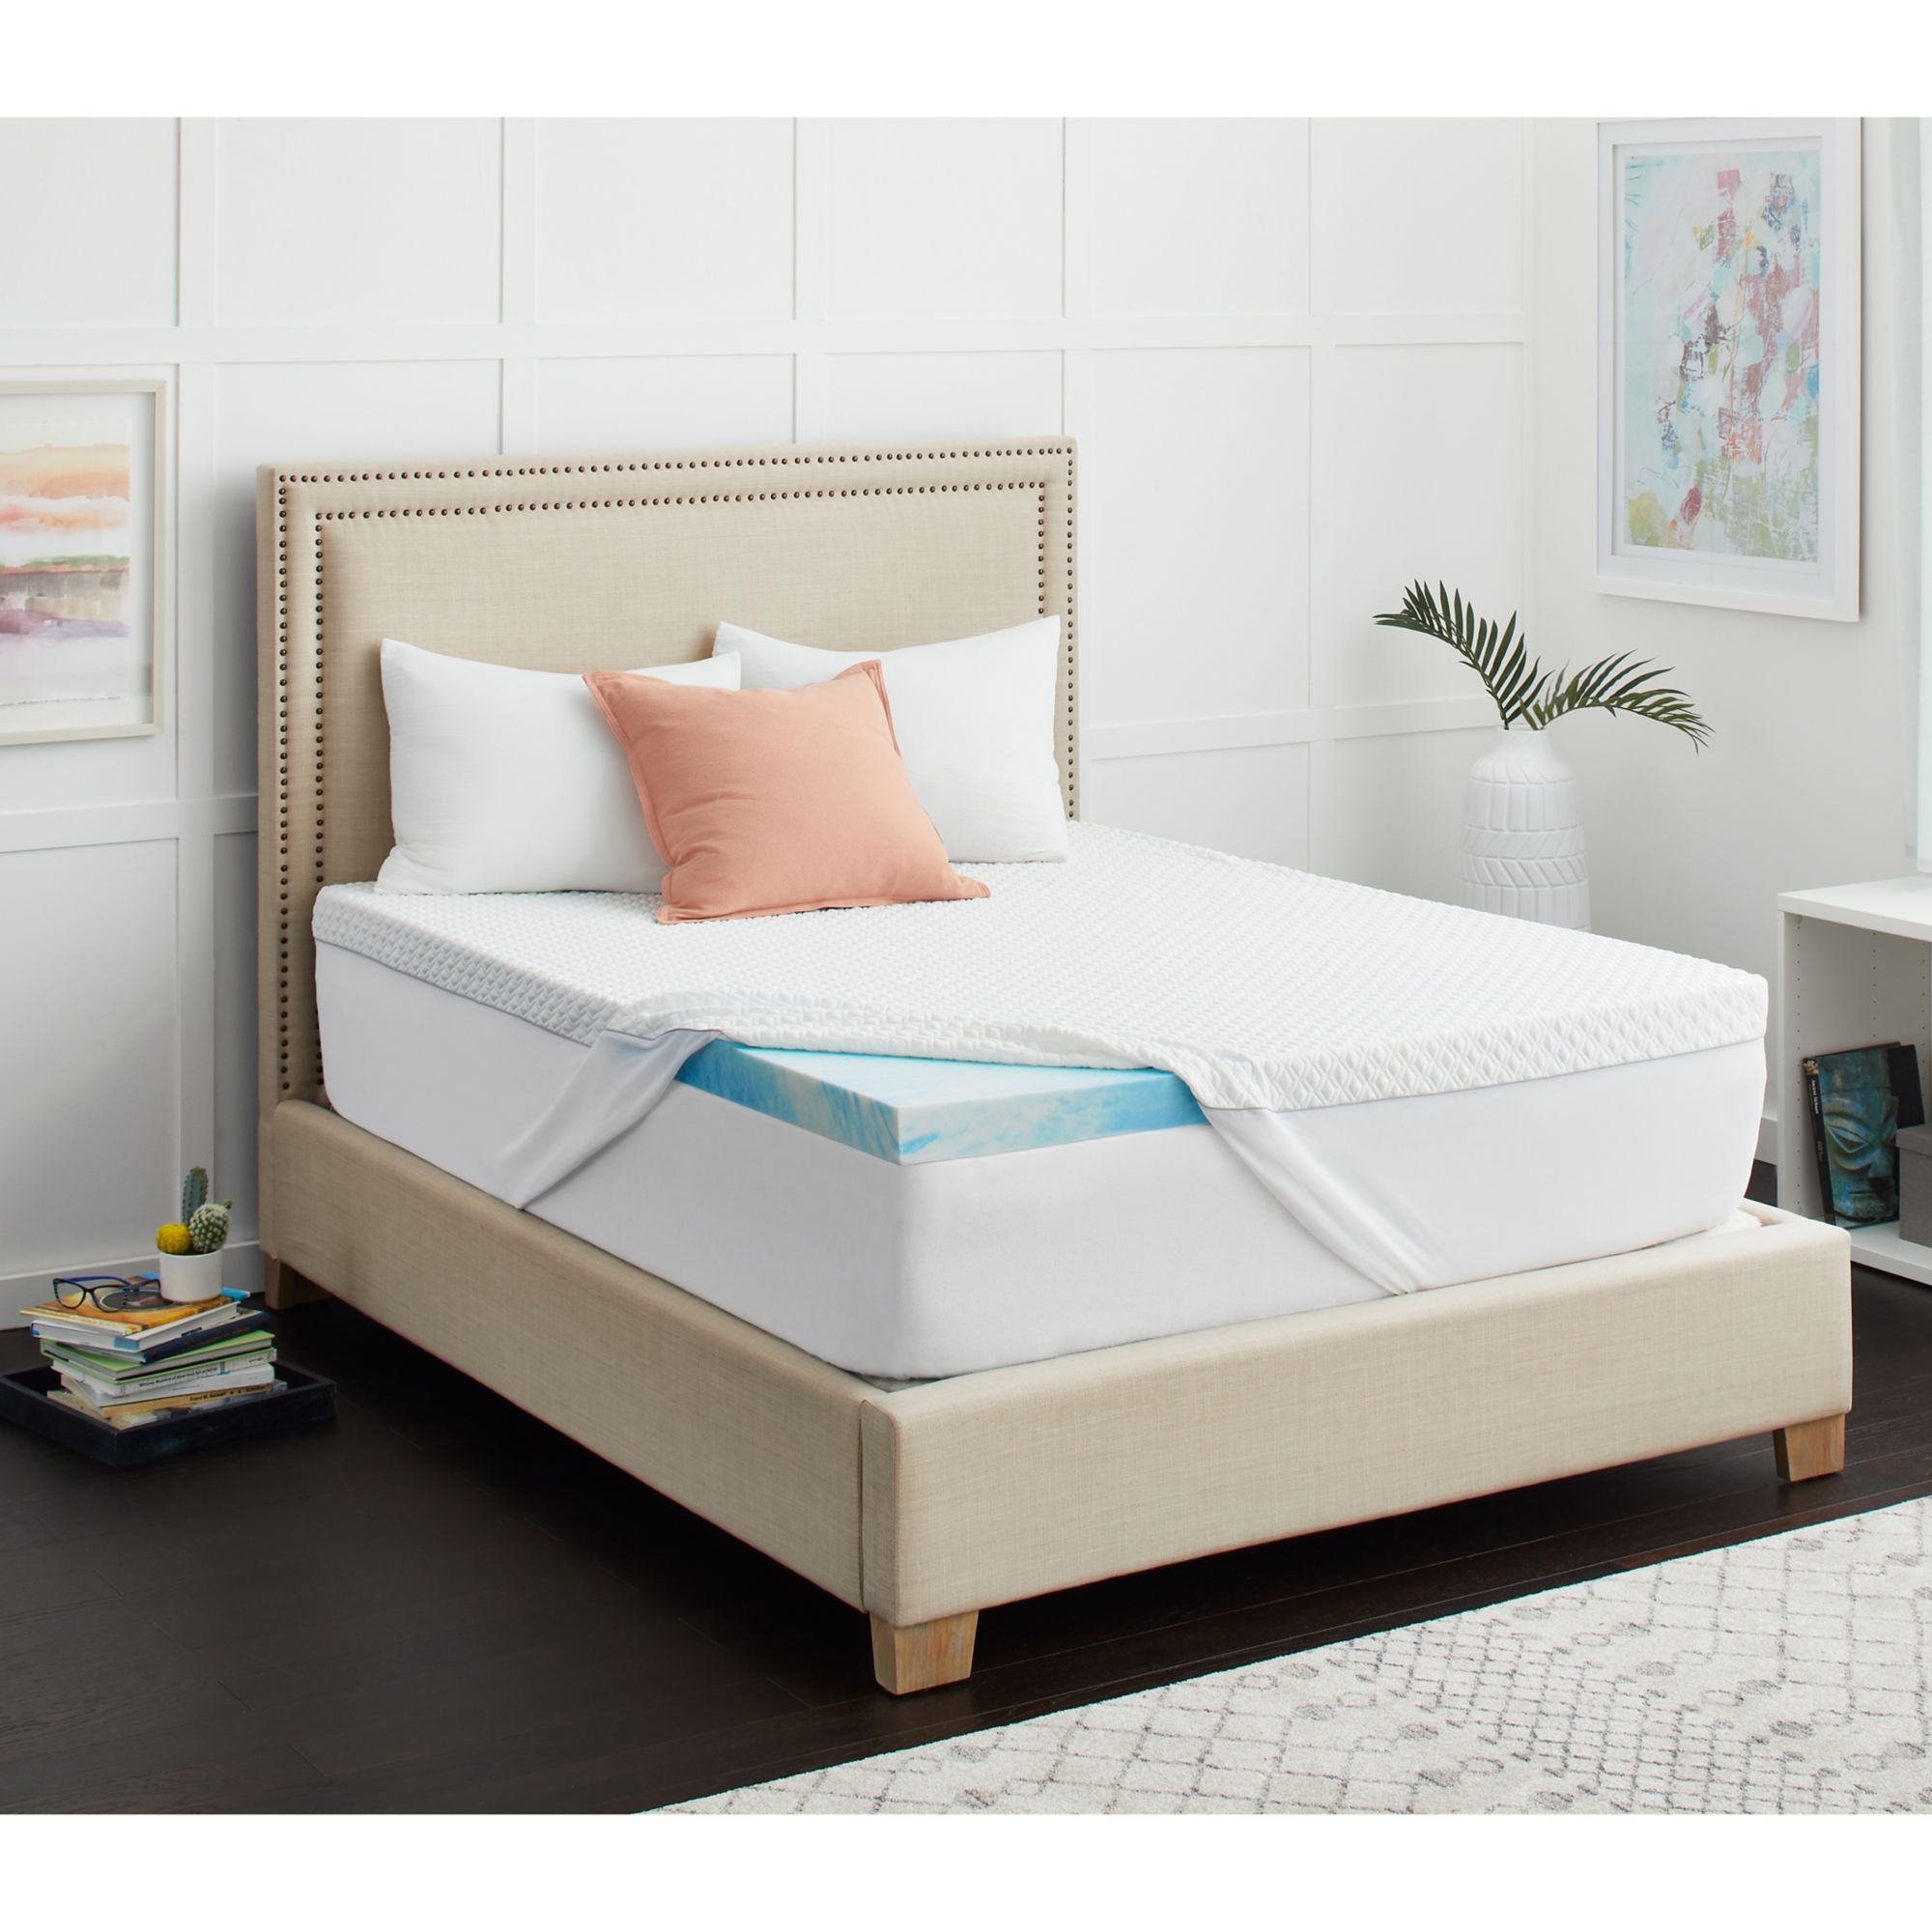 Sealy 3 Sealychill Gel Memory Foam King Size Mattress Topper With Cover Bjs Wholesale Club